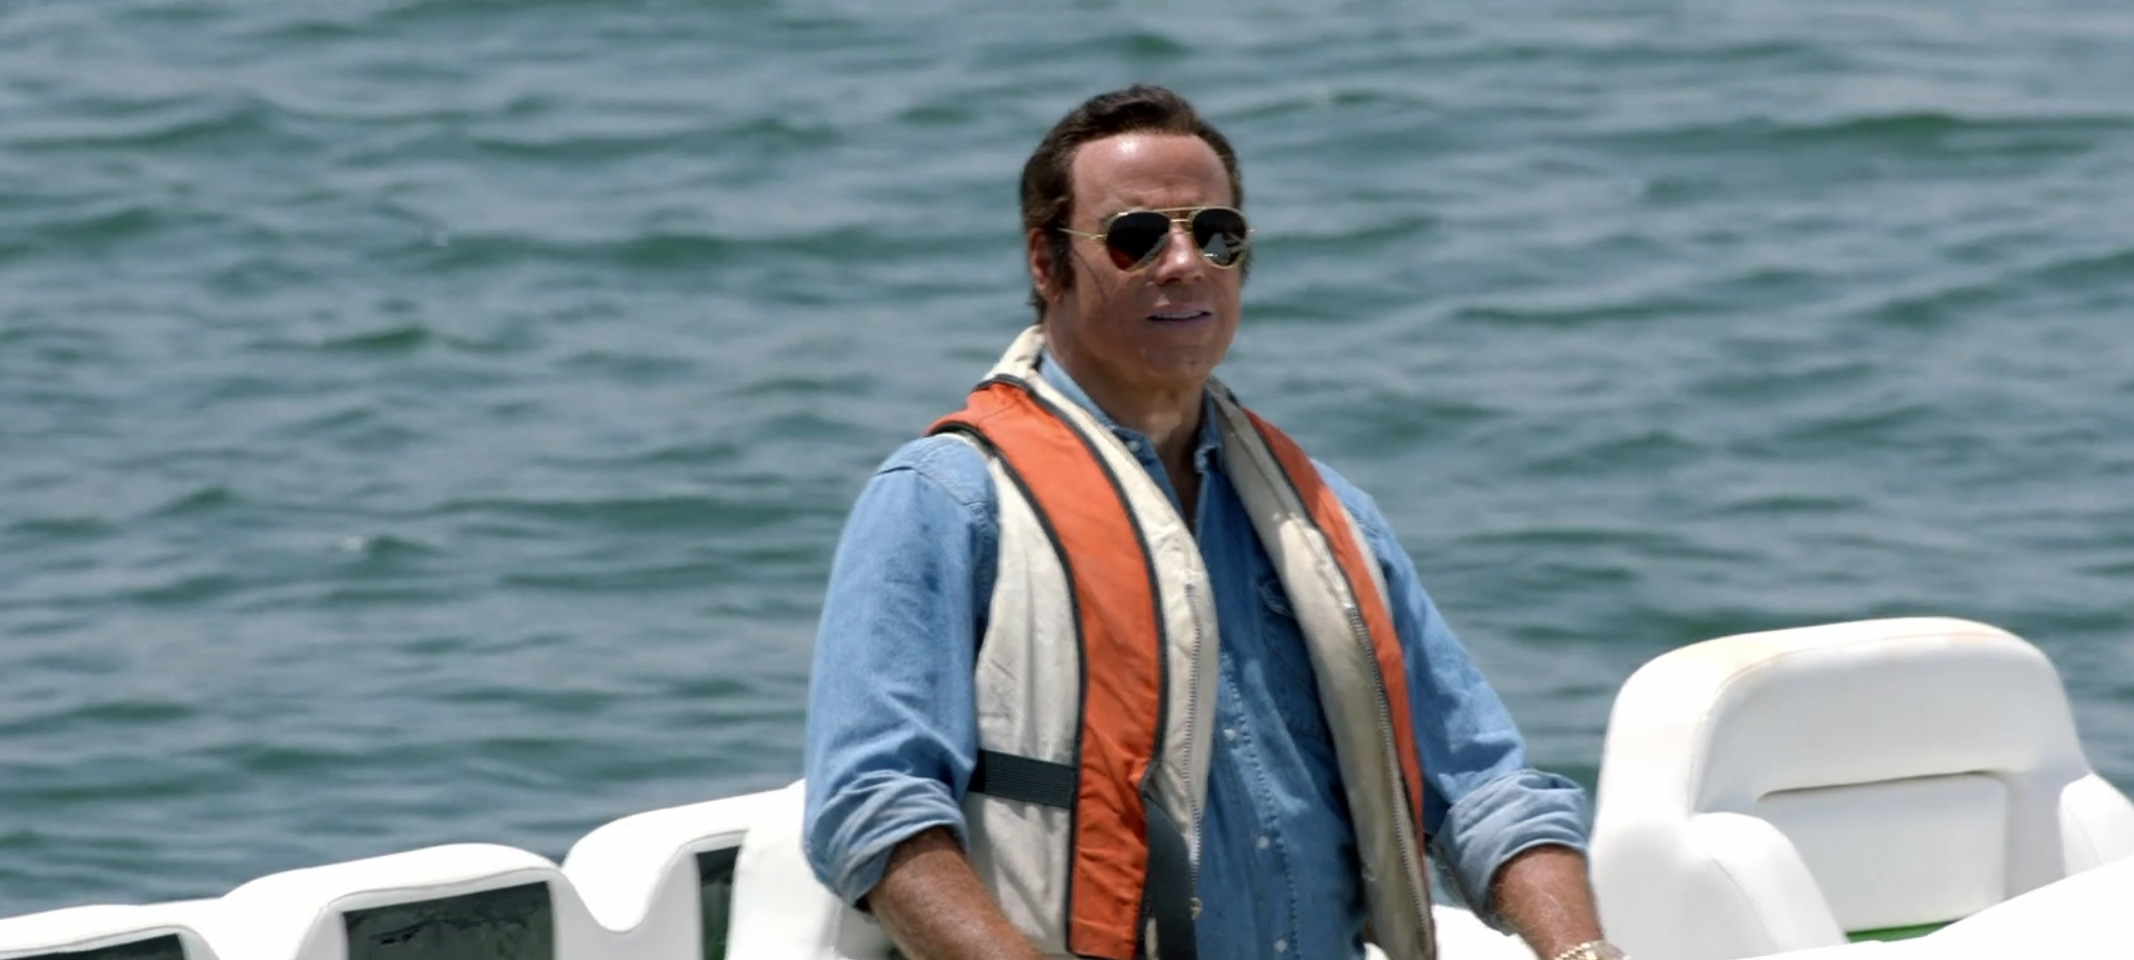 John Travolta Plays A Persona Of Don Aronow In New Film Called Speed Kills Wave To Wave